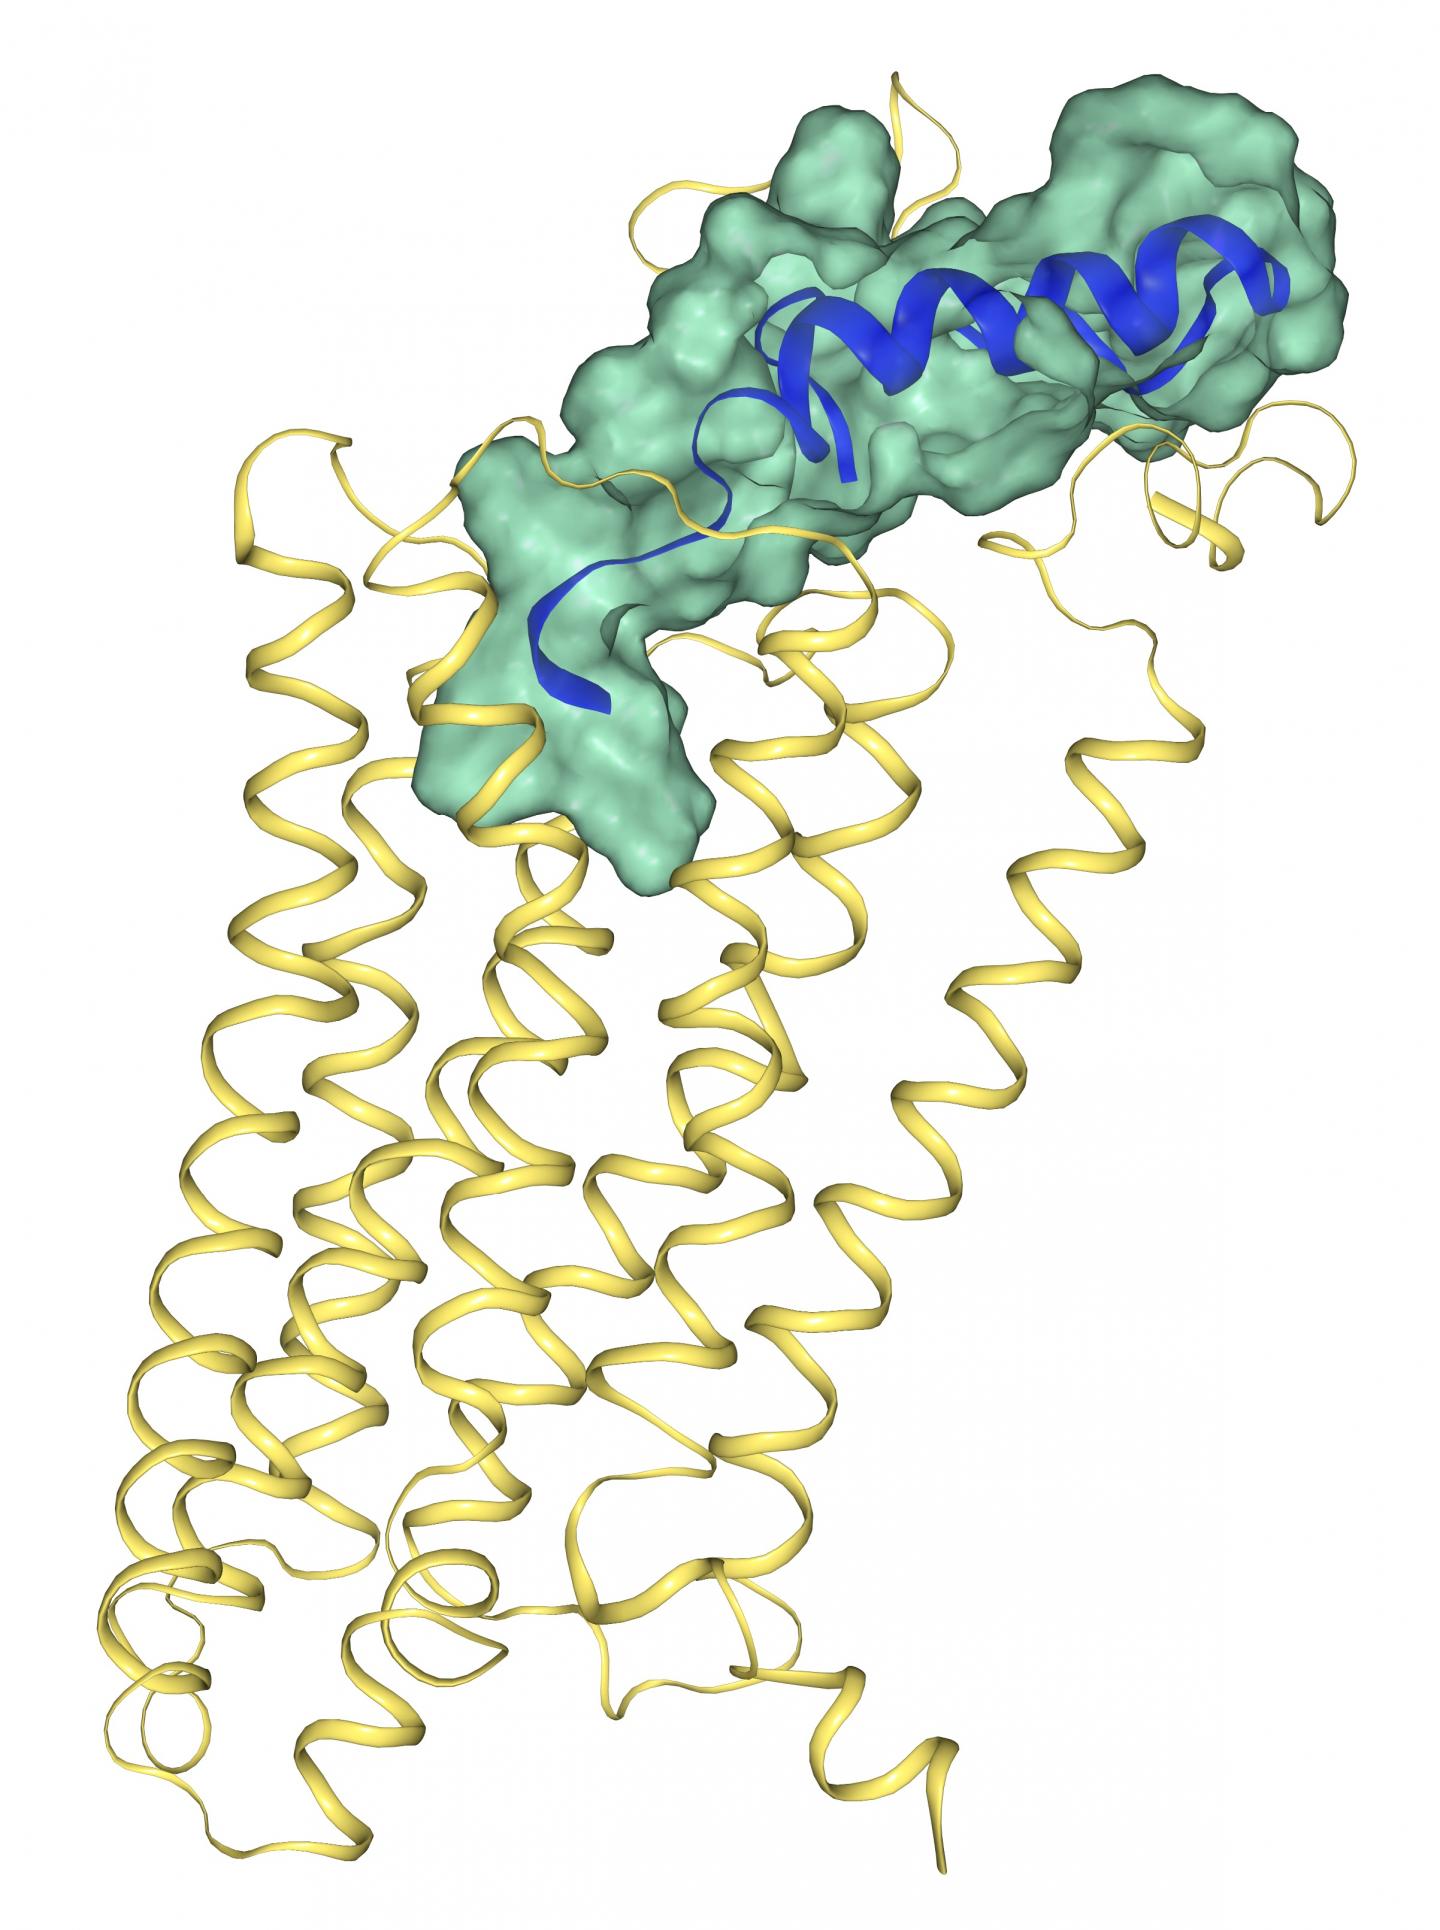 Crystal Structure for a Neuropeptide Y Receptor